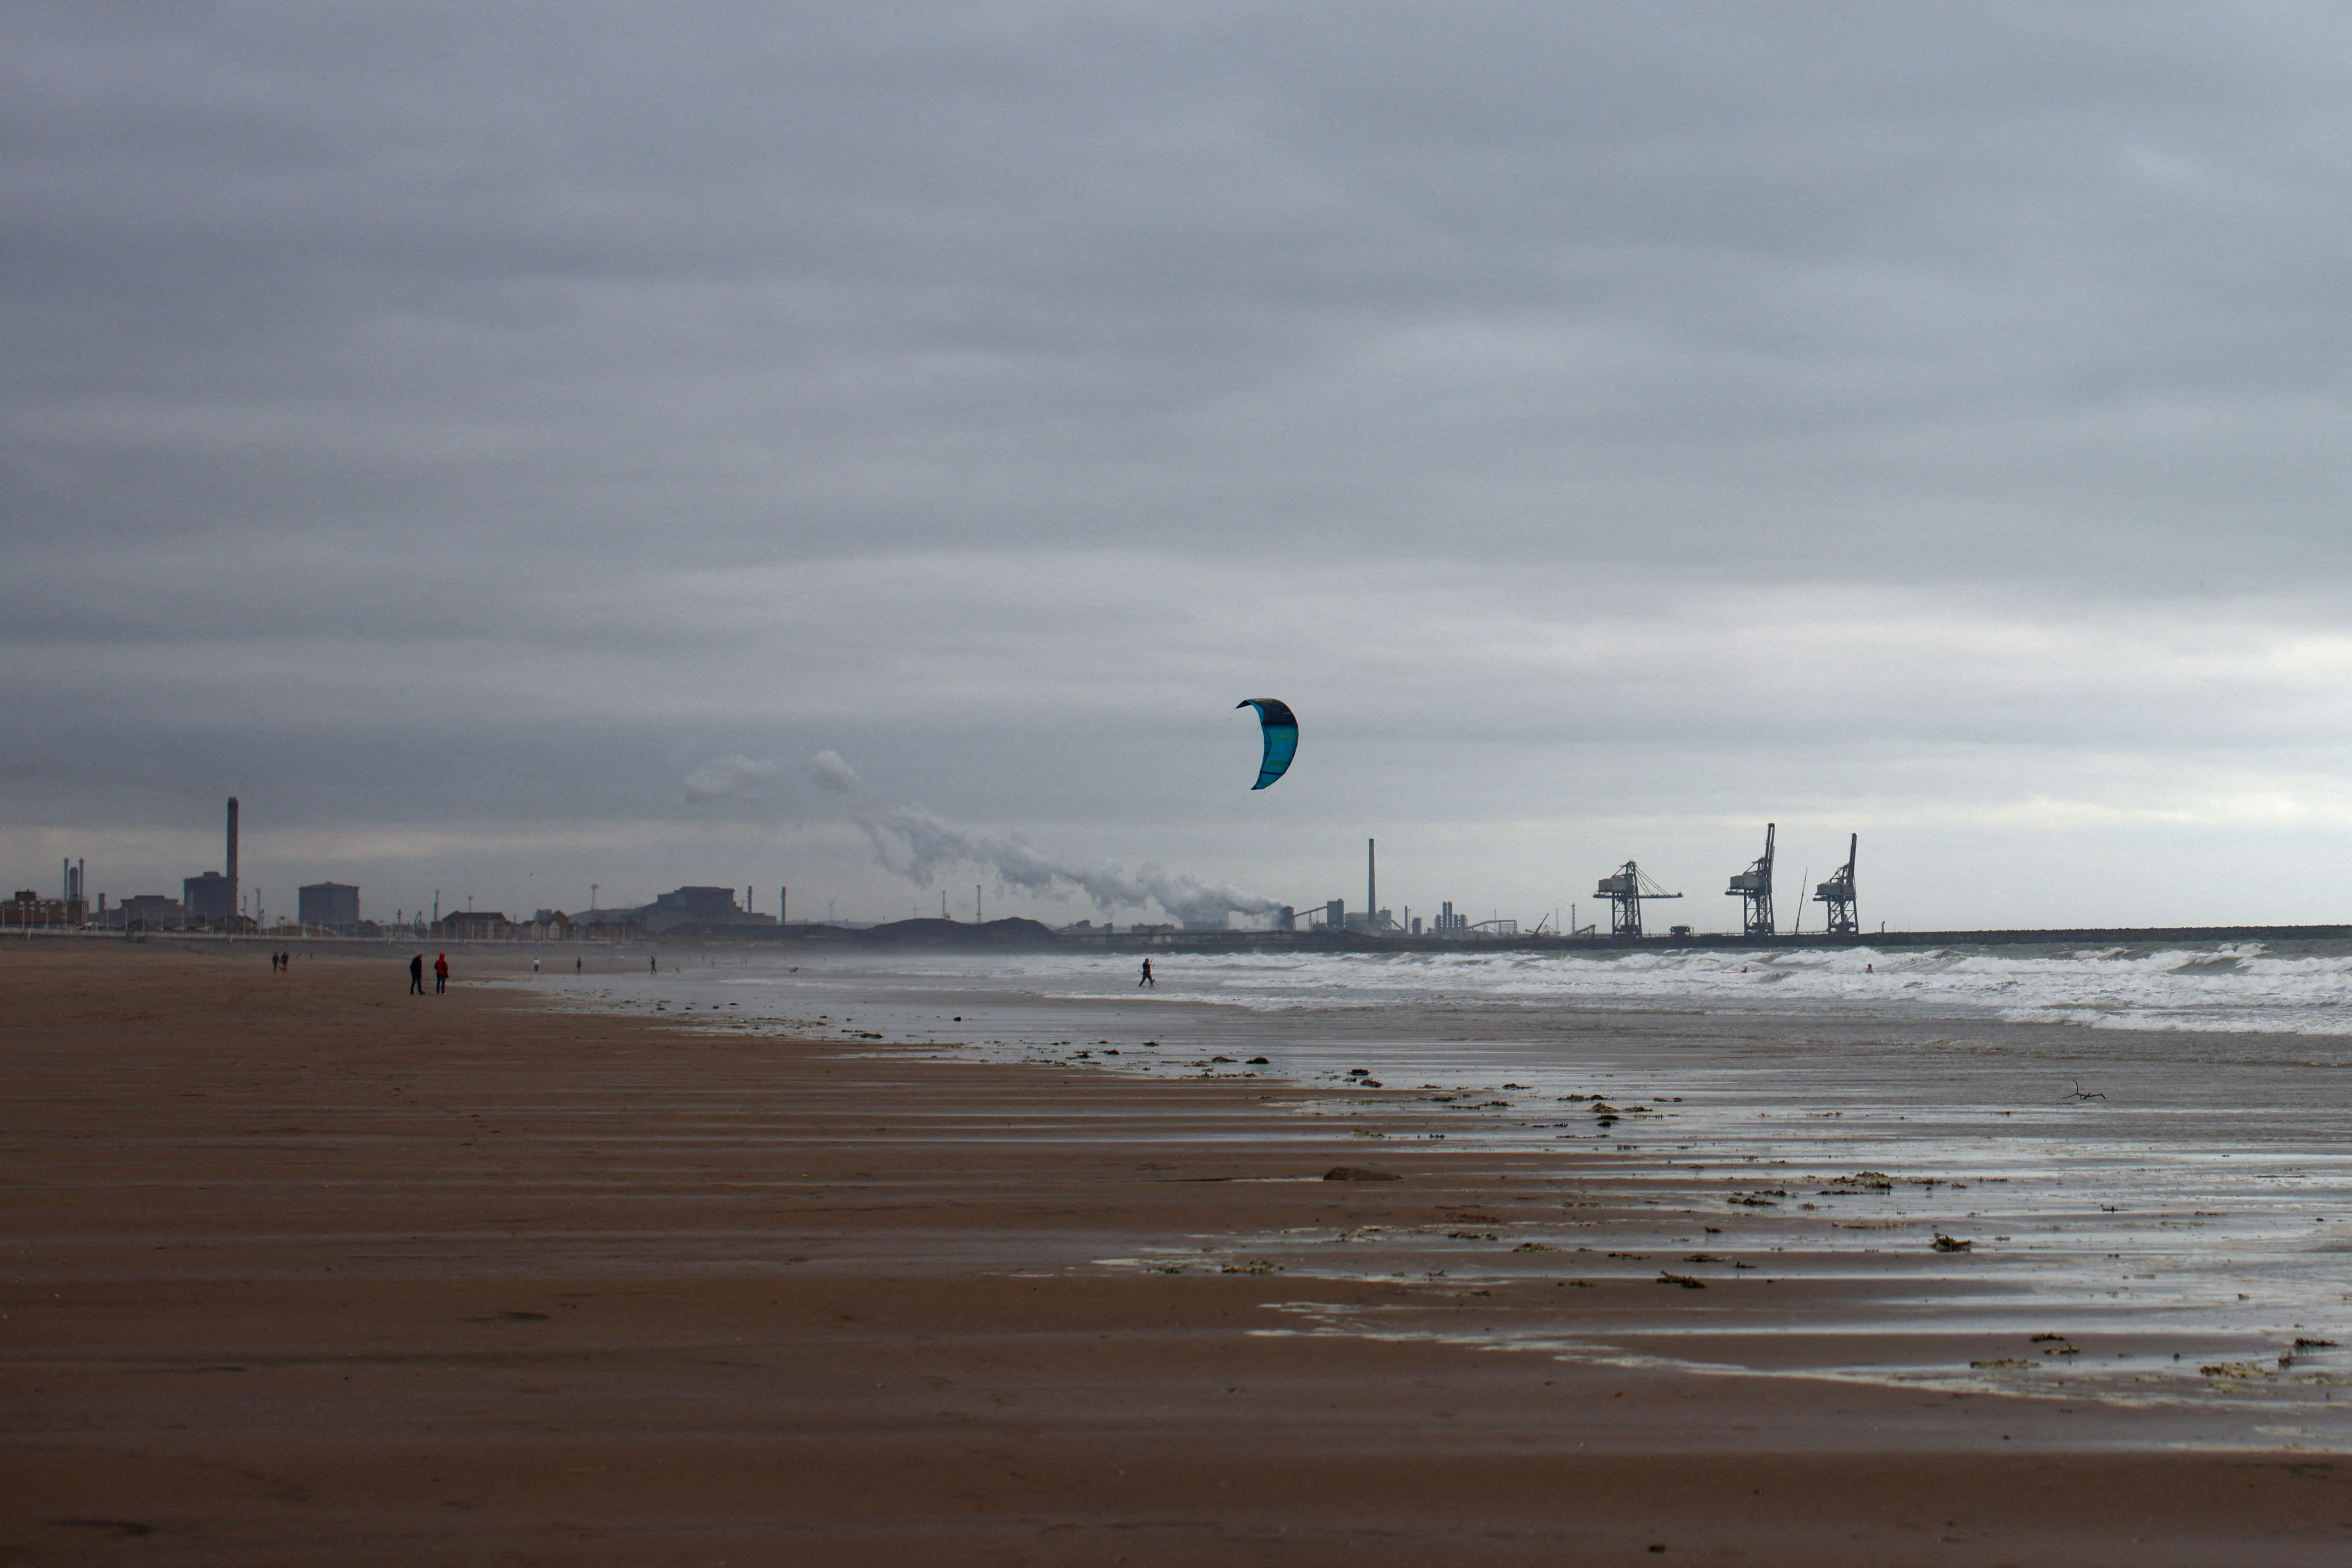 A kite surfer rides in front of a steel factory in Port Talbot